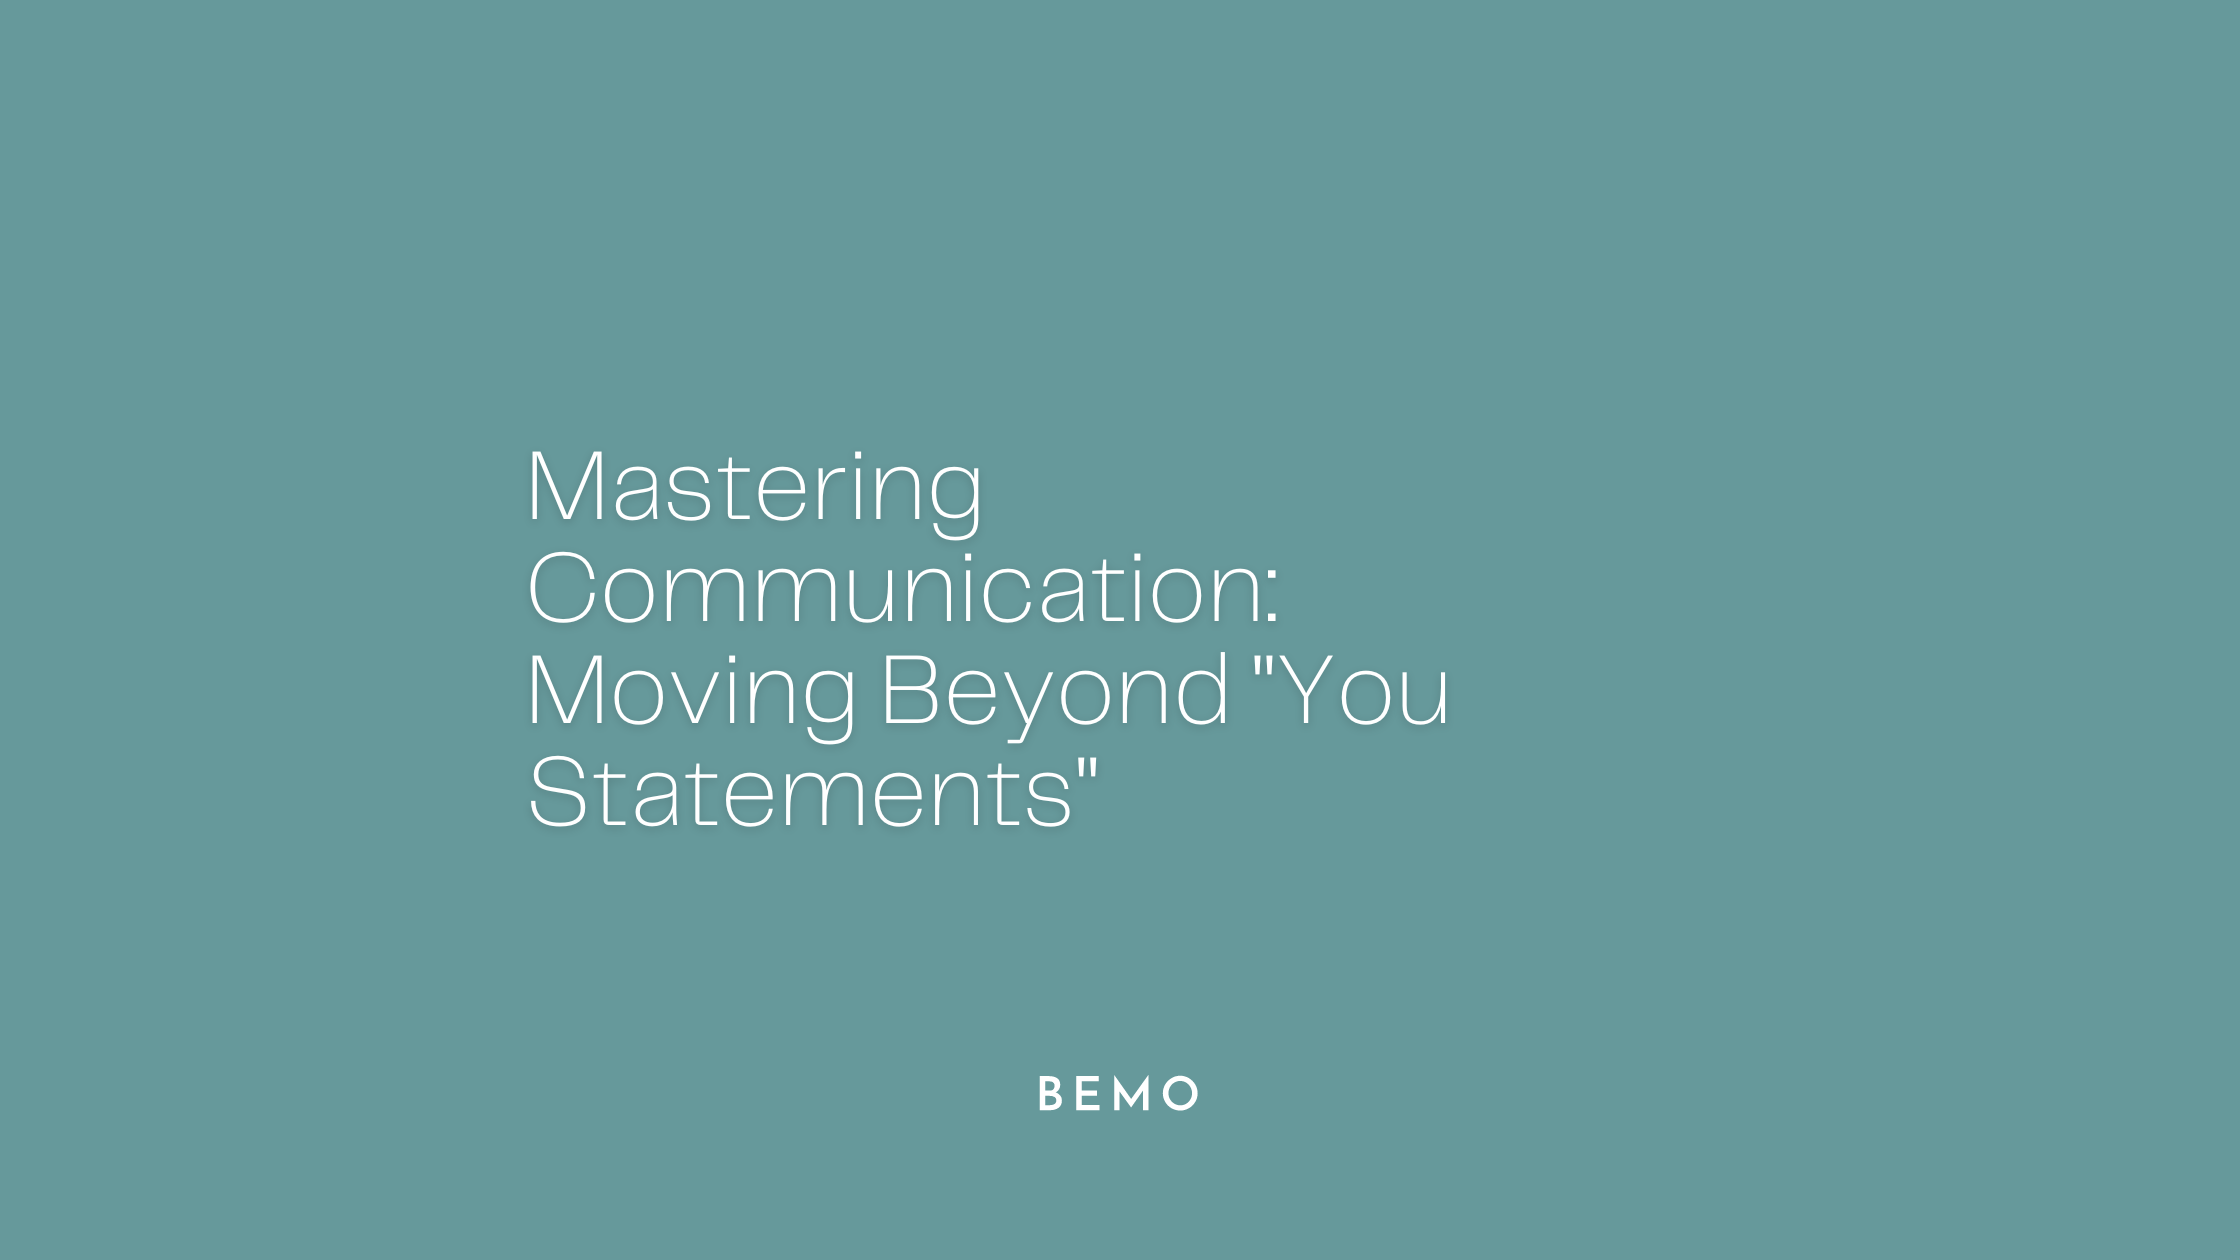 Mastering Communication: Moving Beyond "You" Statements with BeMo's "You Notes"